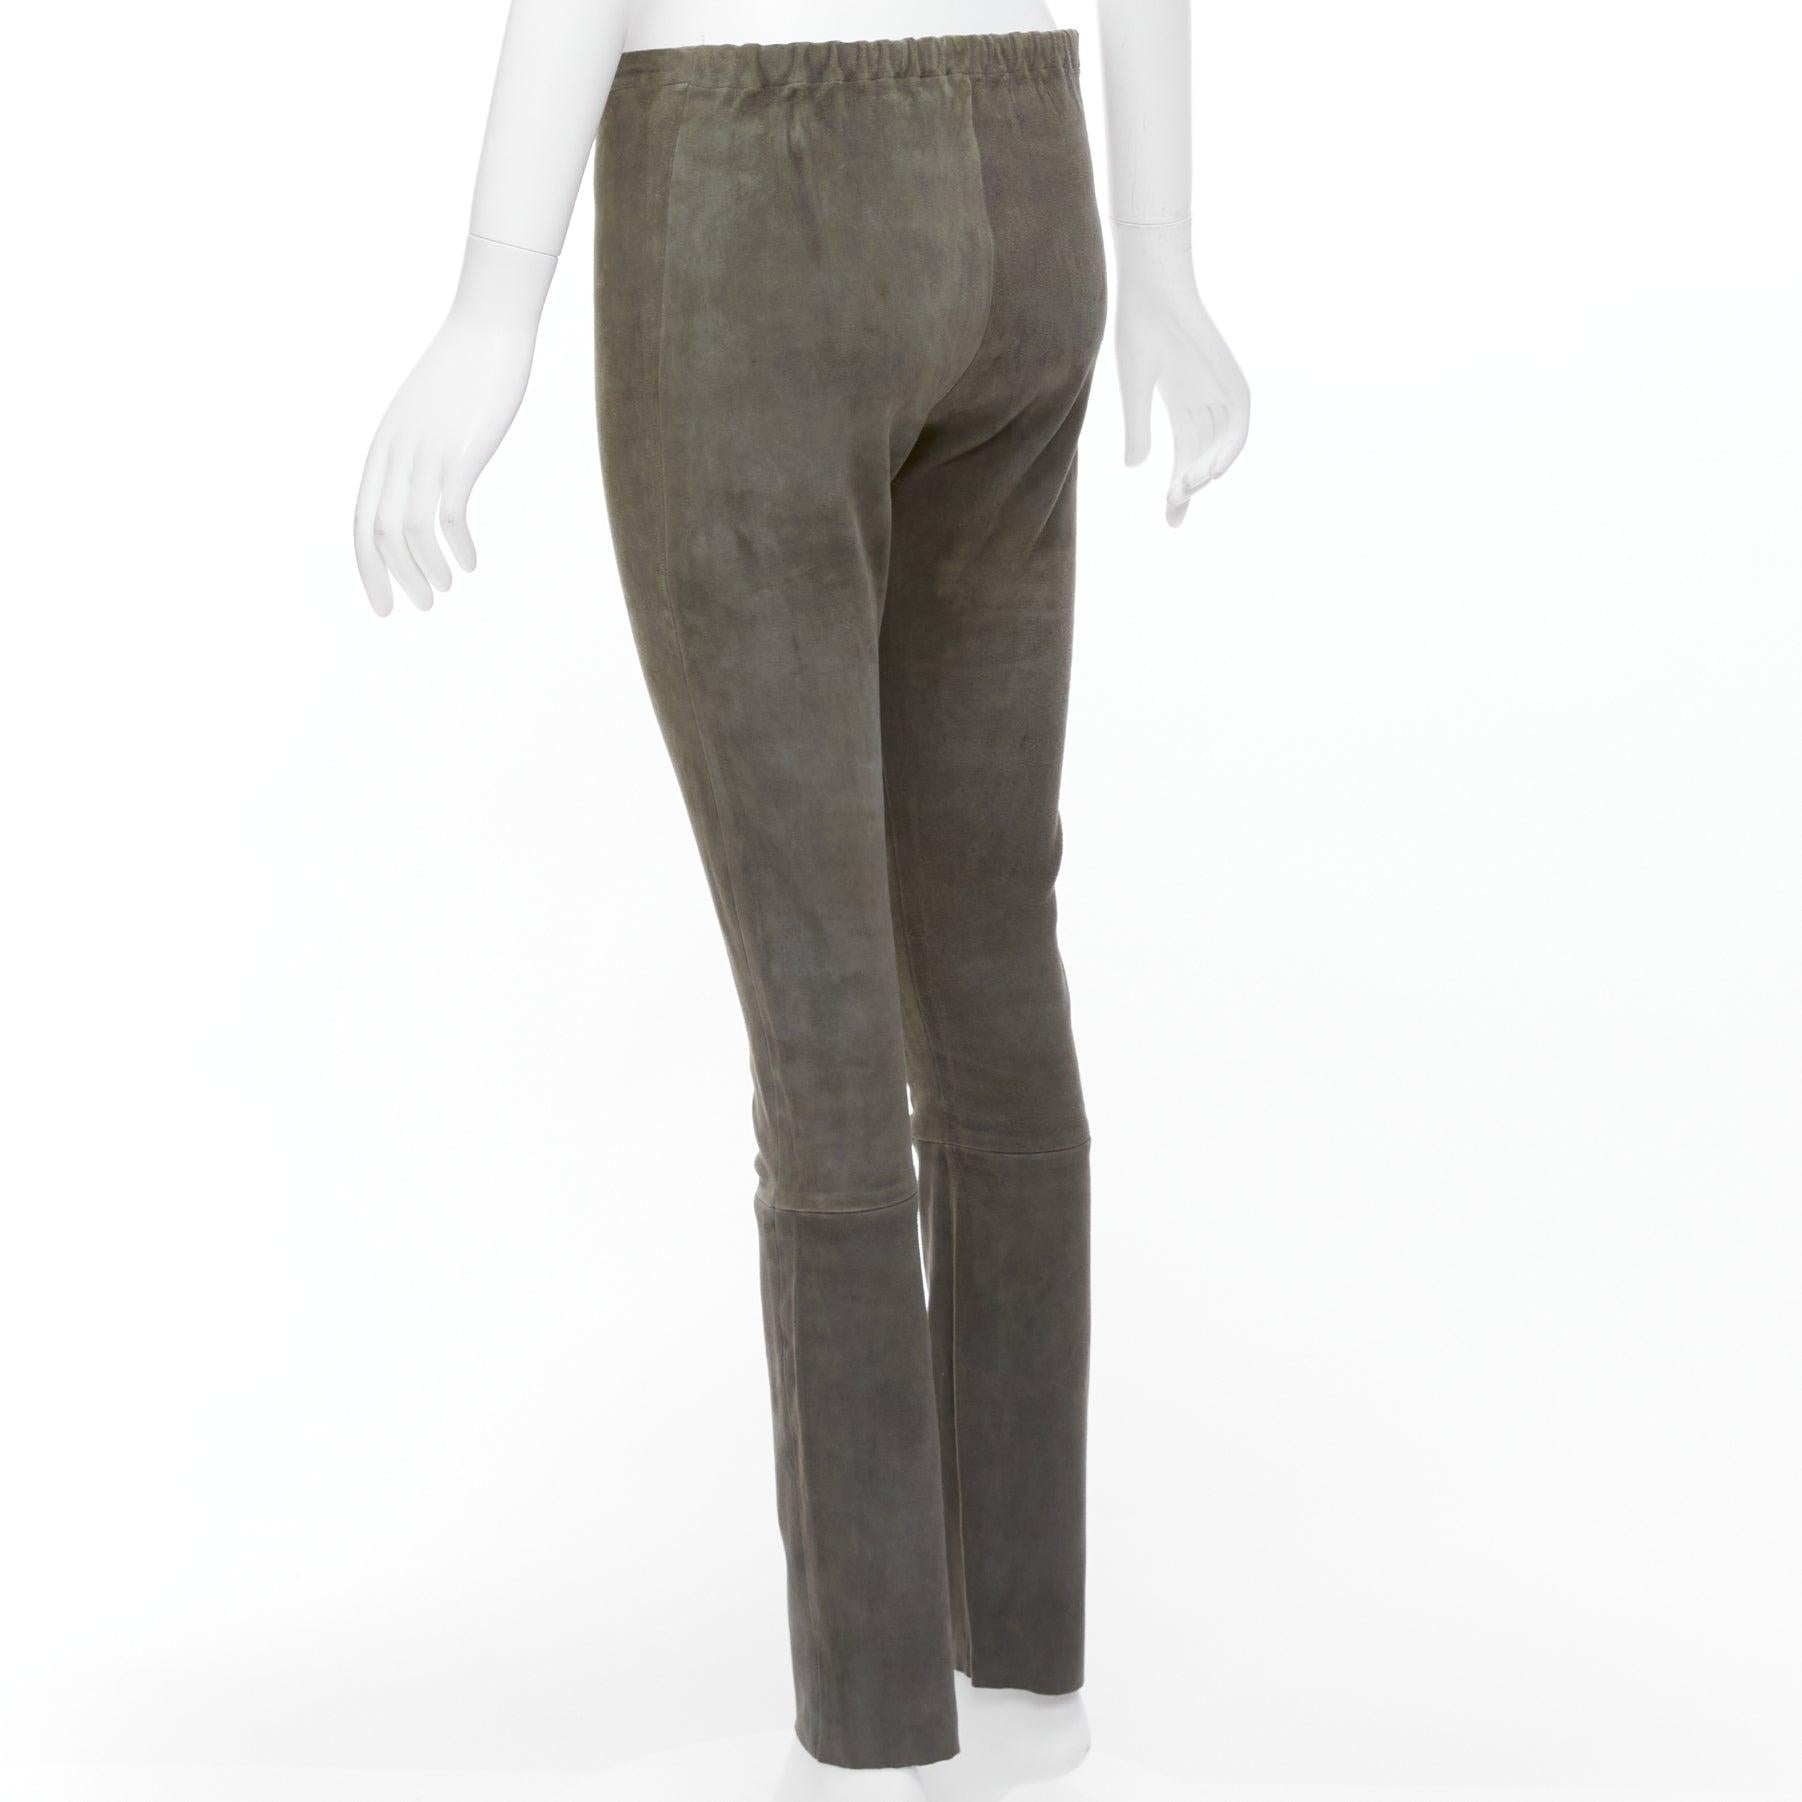 HAIDER ACKERMANN green grey suede leather flared legging pants FR36 S For Sale 2